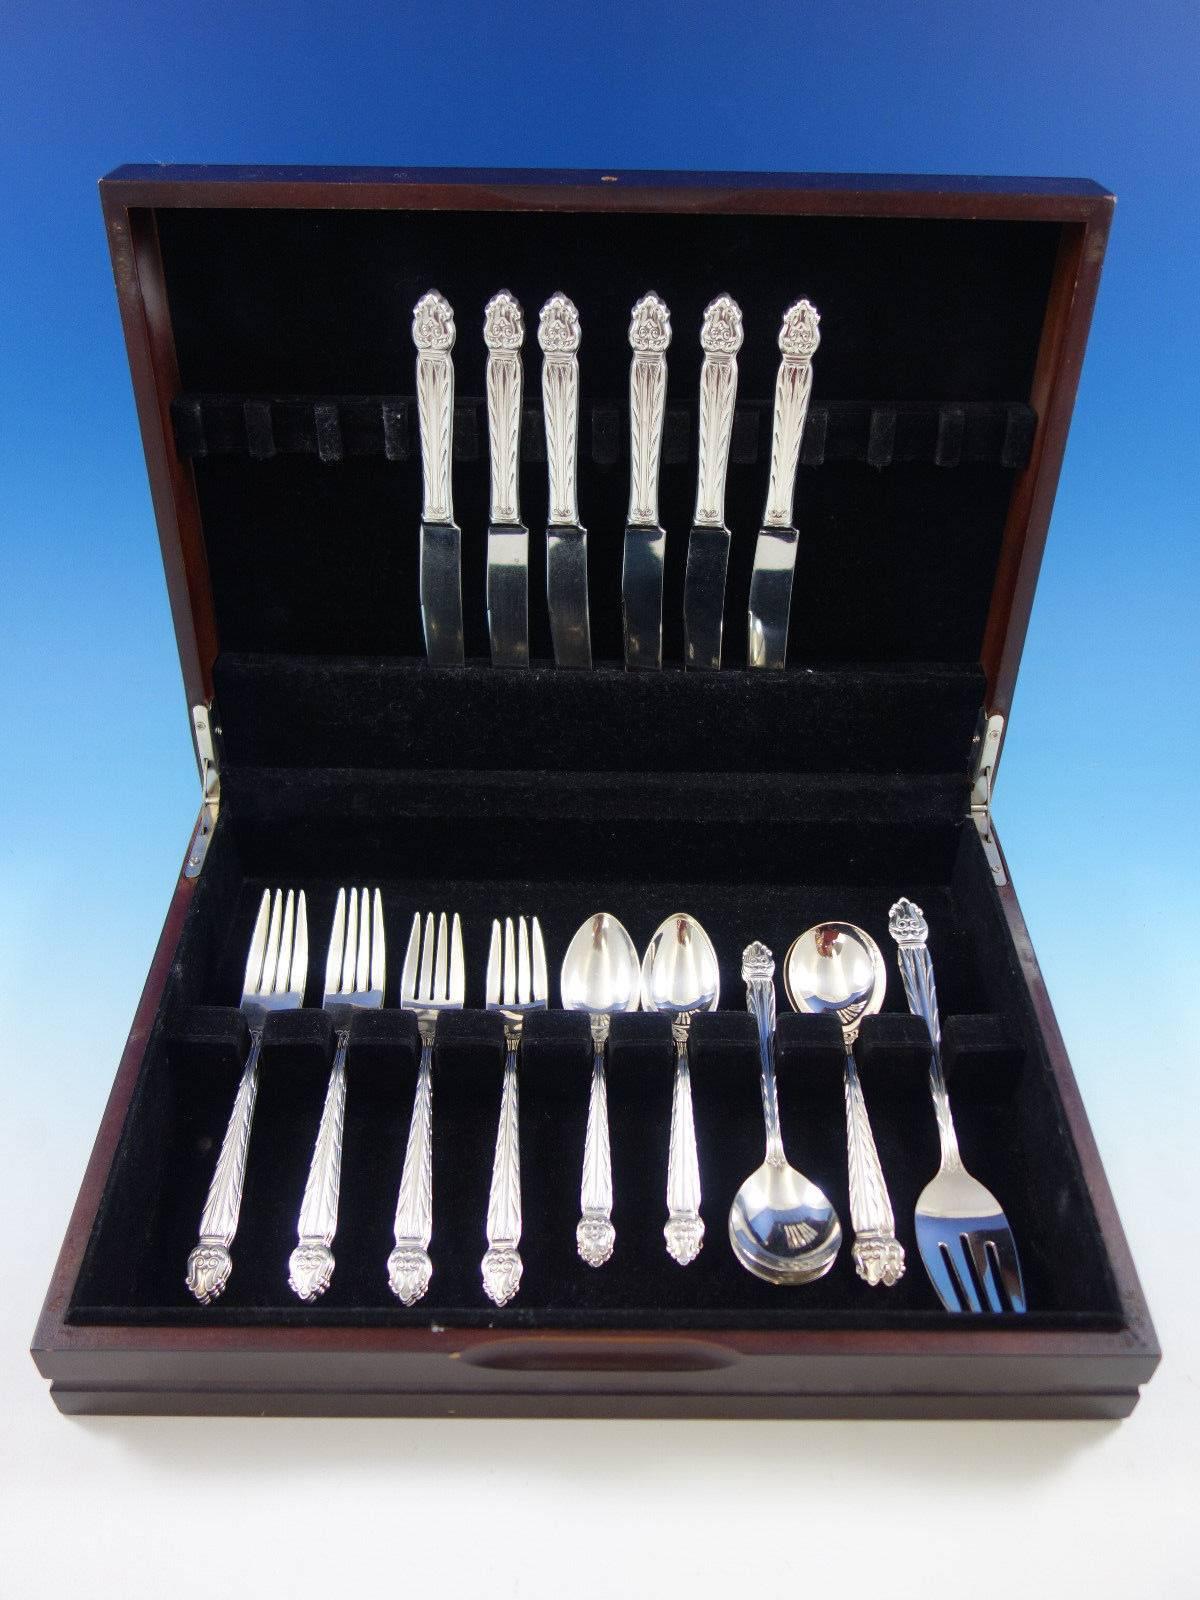 Intermezzo by National sterling silver flatware set with Scandinavian-style design, 31 pieces. This set includes: 

Six knives, 8 3/4